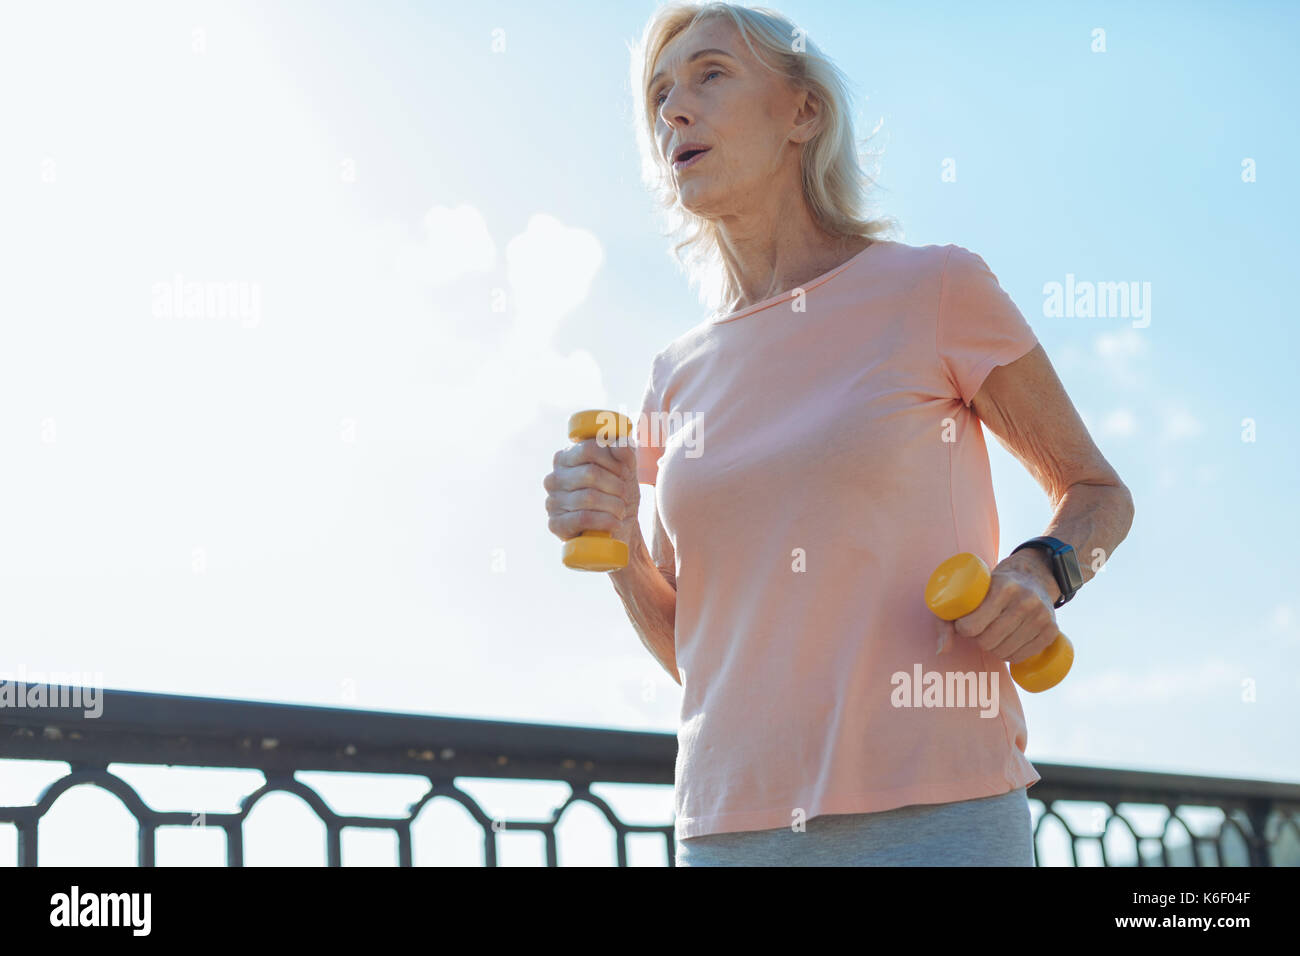 Athletic woman running with dumbbells Stock Photo